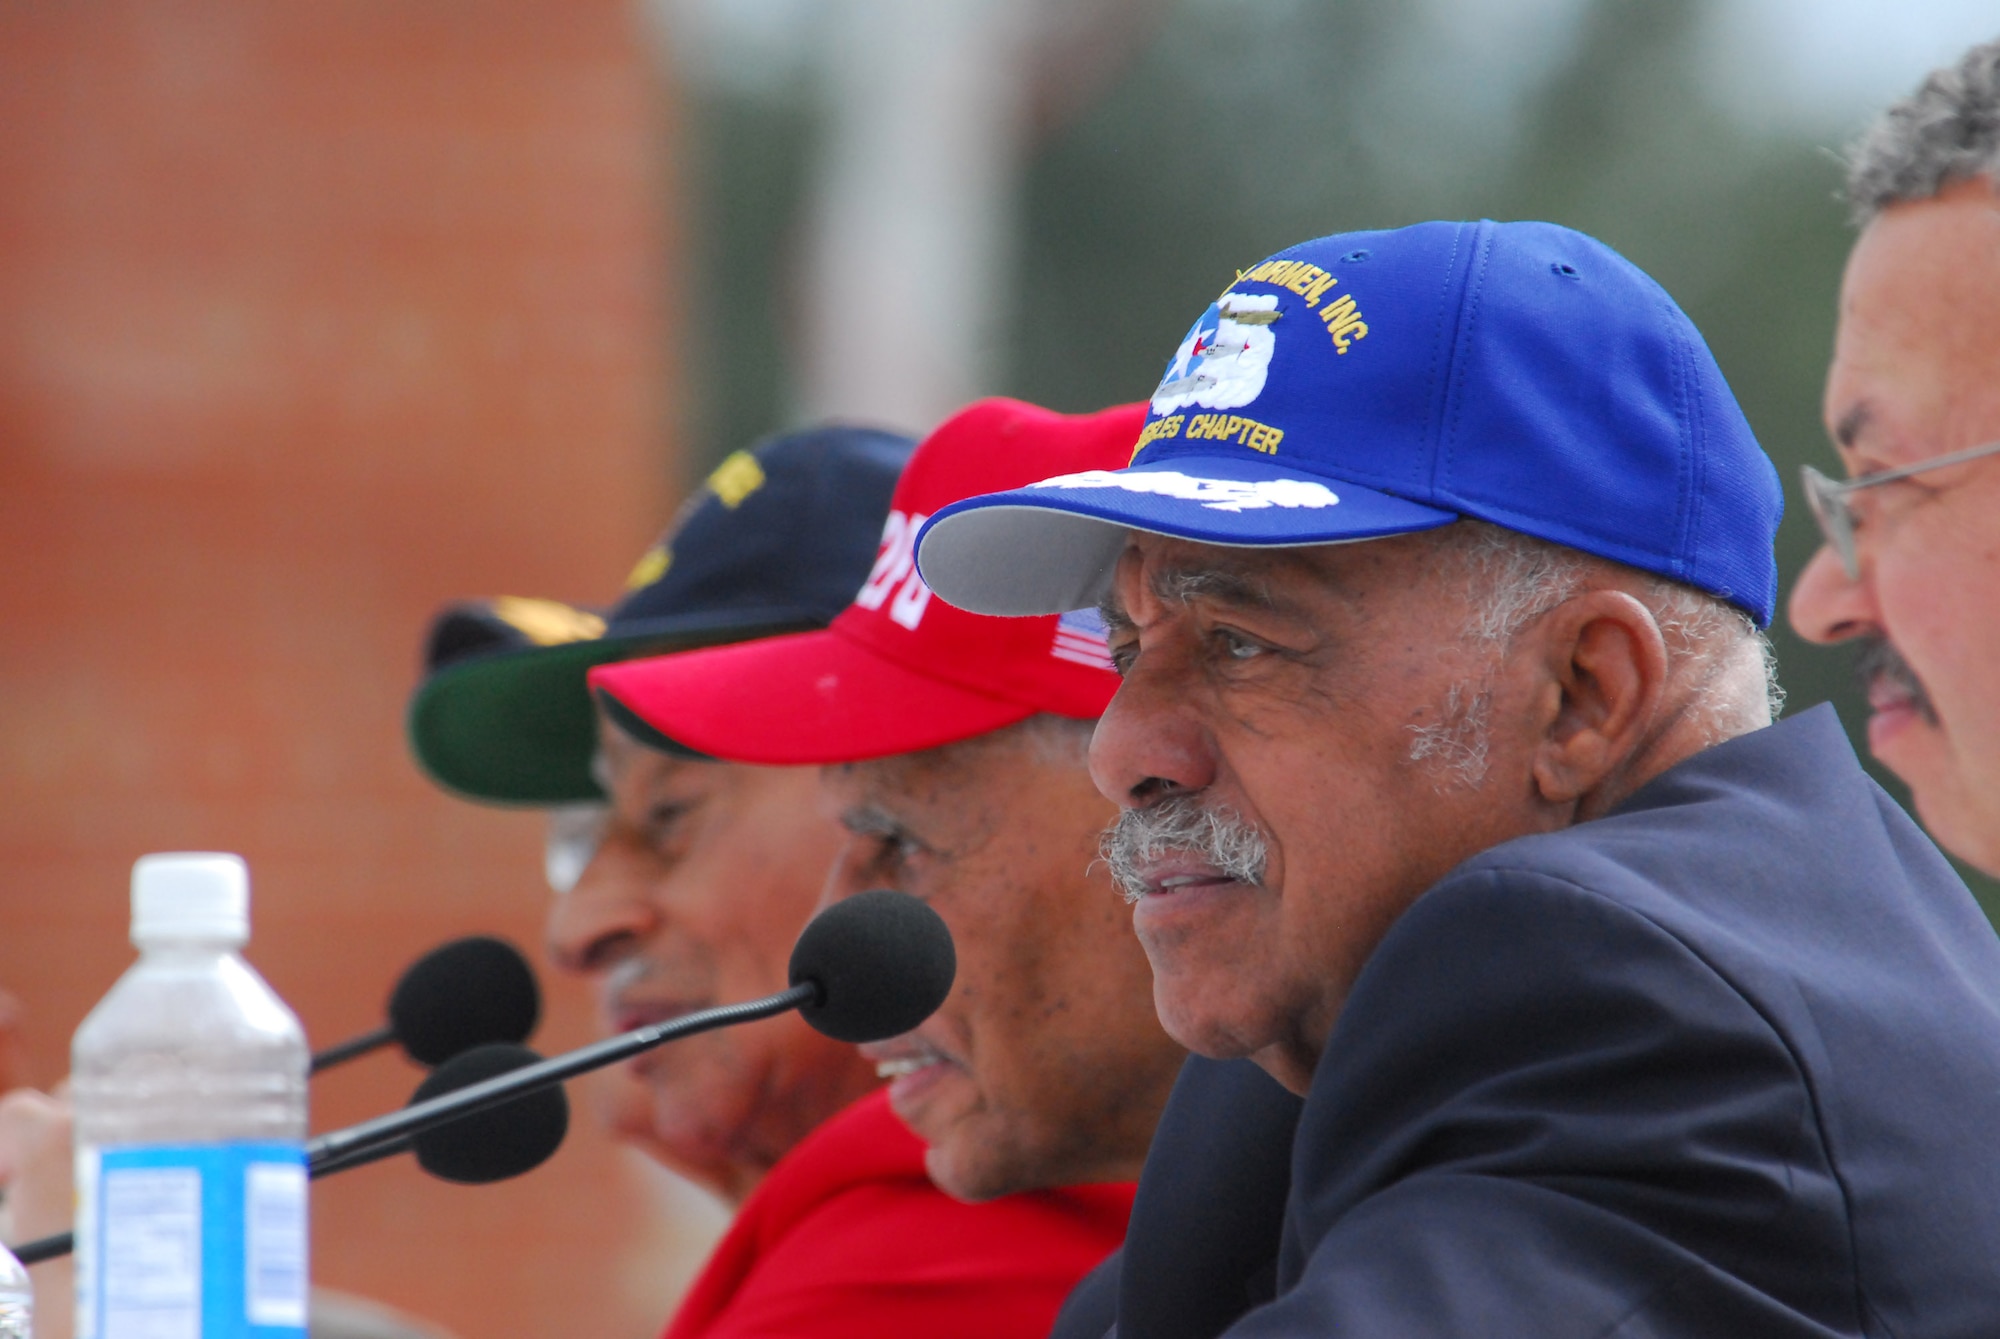 Retired Lt. Col. William Holloman, one of the Documented Original Tuskegee Airmen, participates in a panel discussion prior to the opening ceremony of the Tuskegee Airmen National Historic Site Oct. 10 at Moton Field, Ala. (Air Force photo by Scott Knuteson)